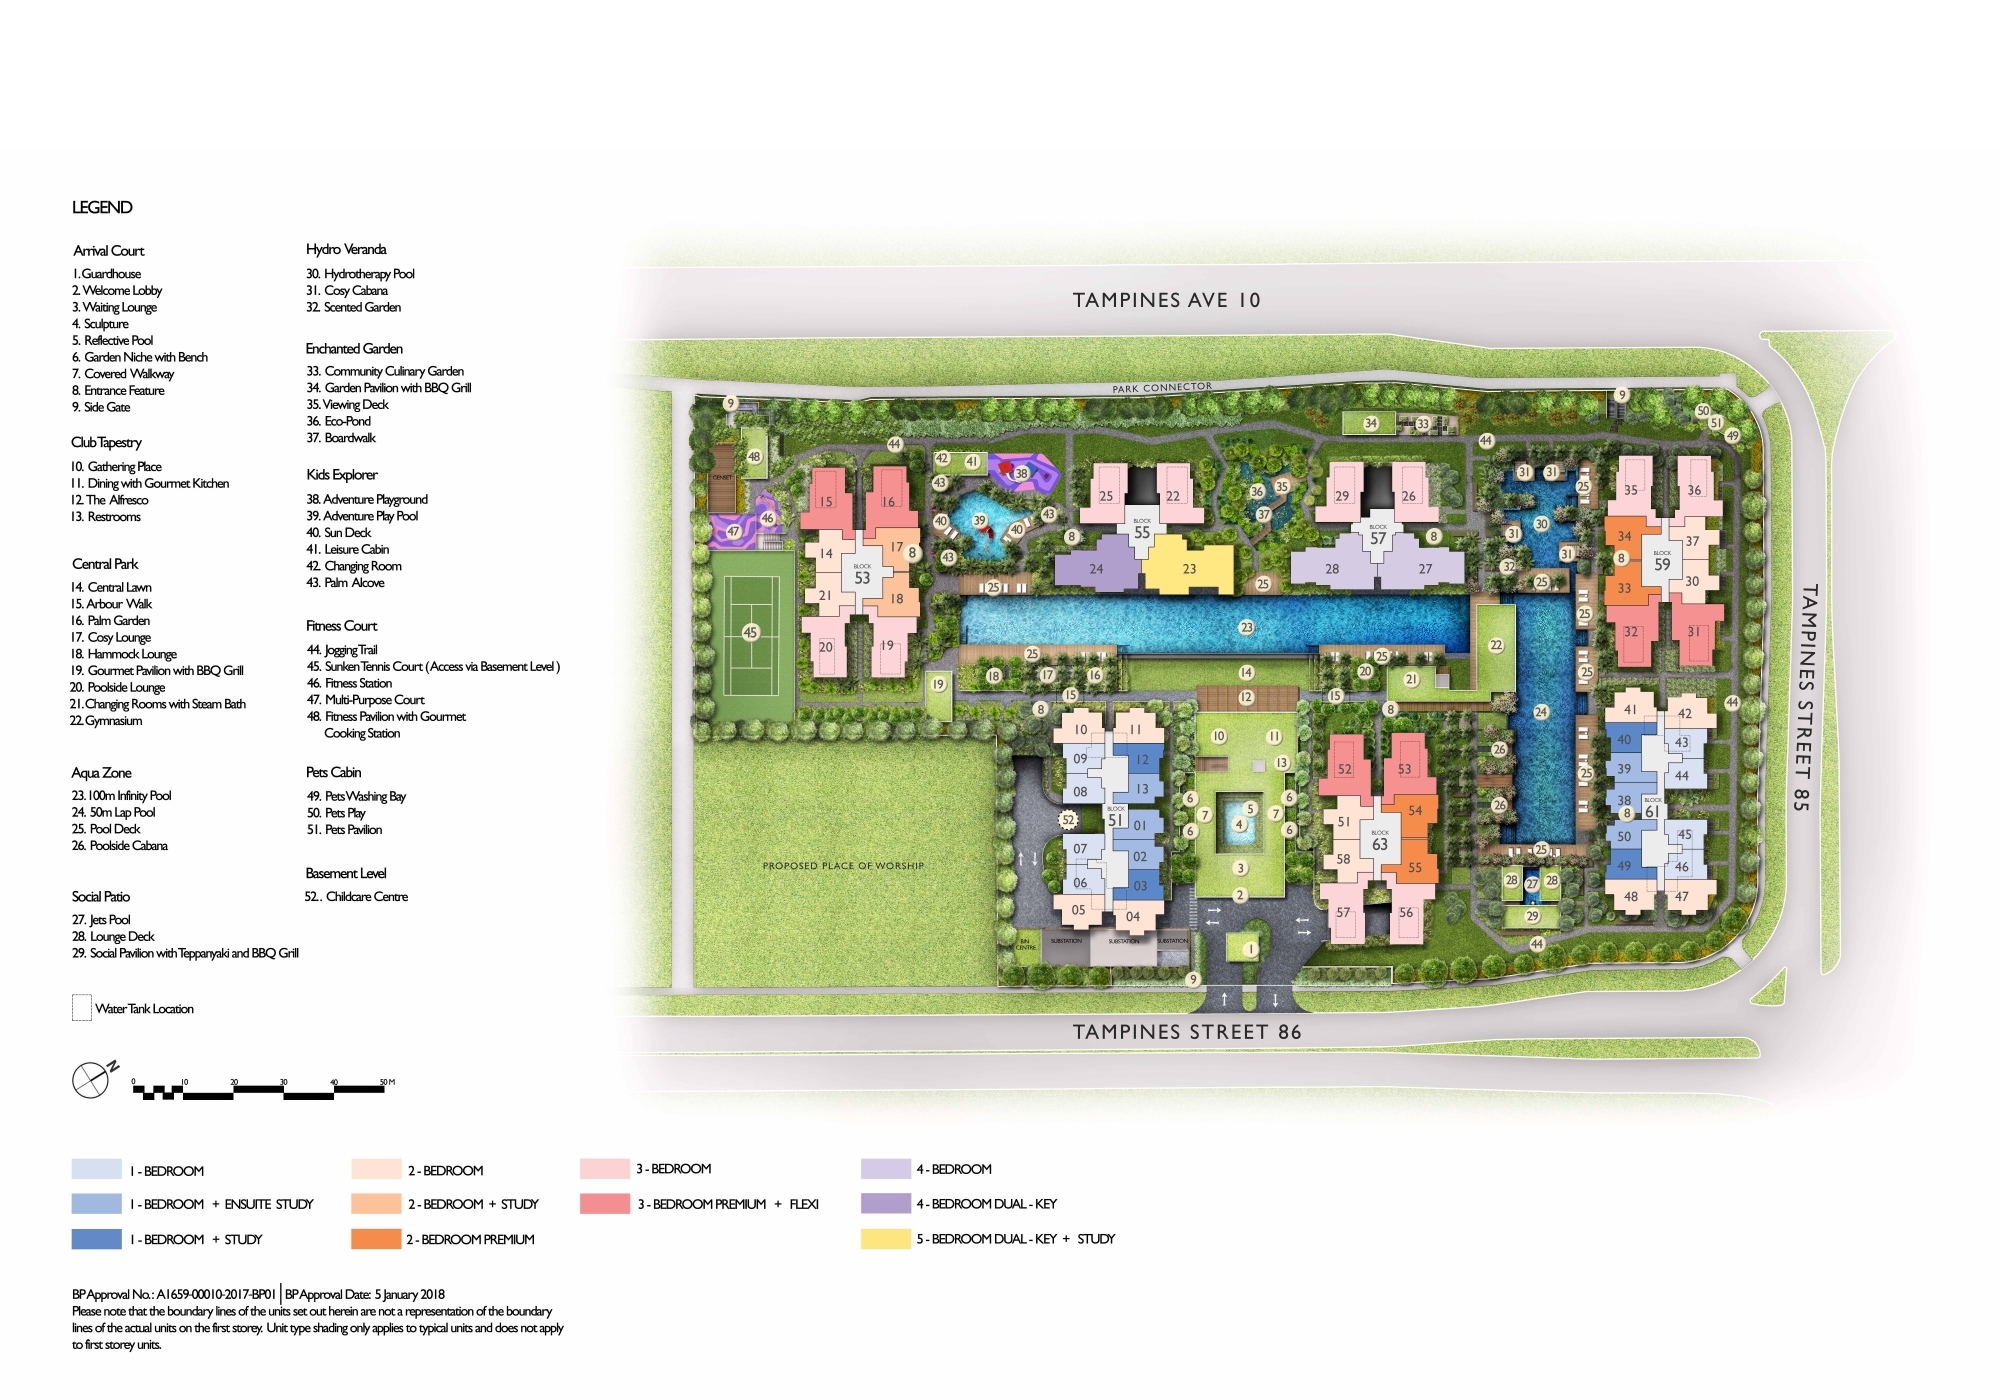 The Tapestry site plan